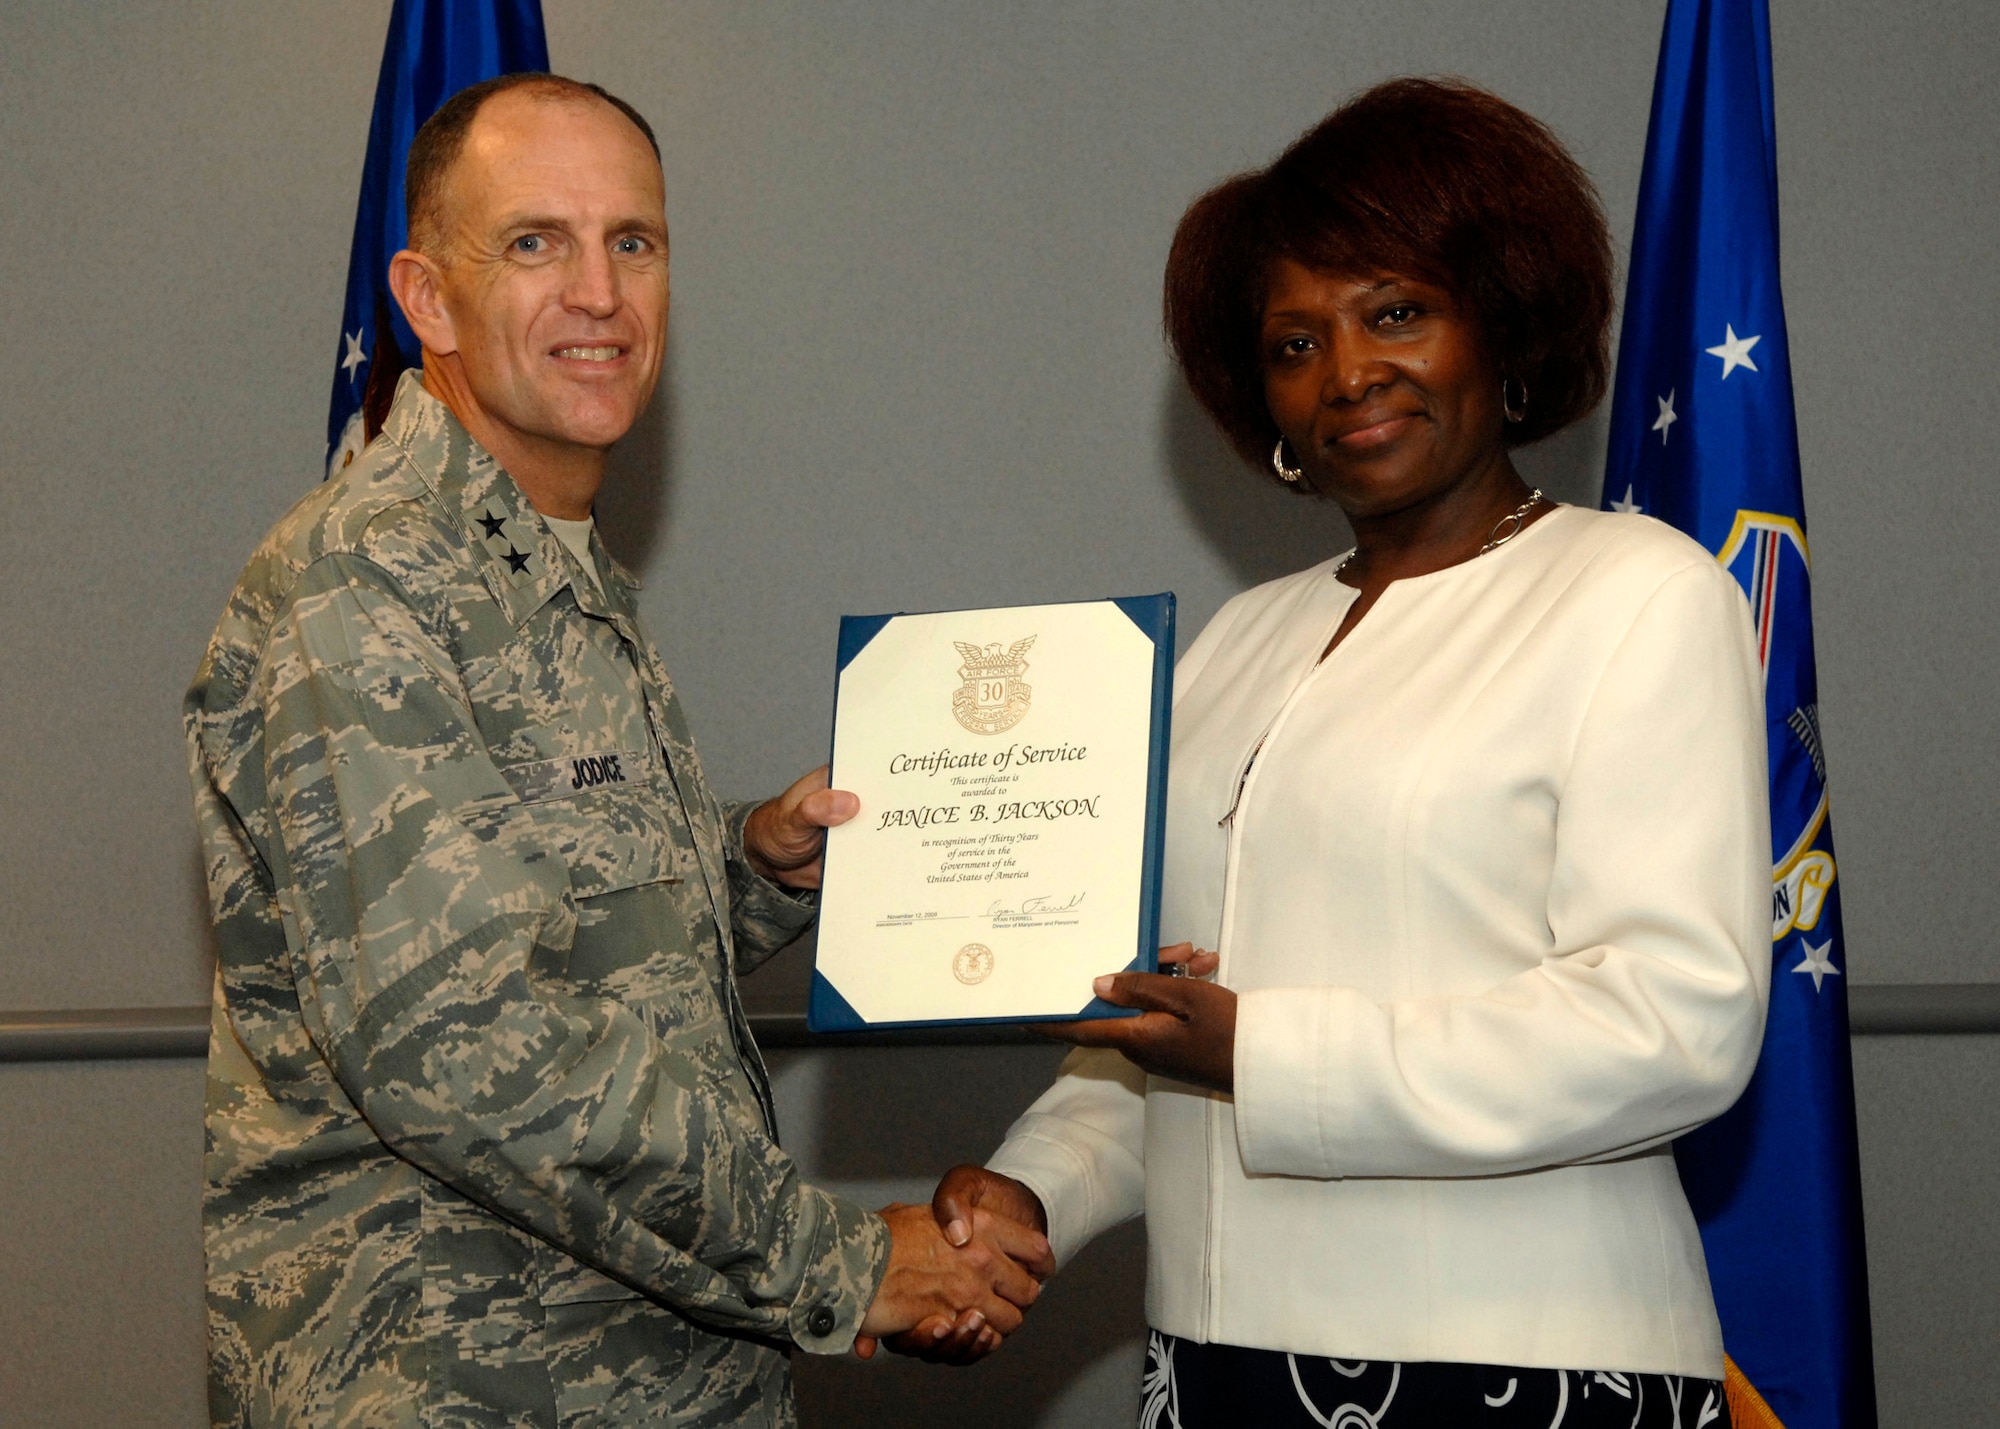 Maj. Gen. Ralph Jodice presents an award to Ms. Janice Jackson for 30 years of outstanding service to the federal government during an Aug. 14 ceremony. (Photo by Sgt. Melissa Stonecipher)